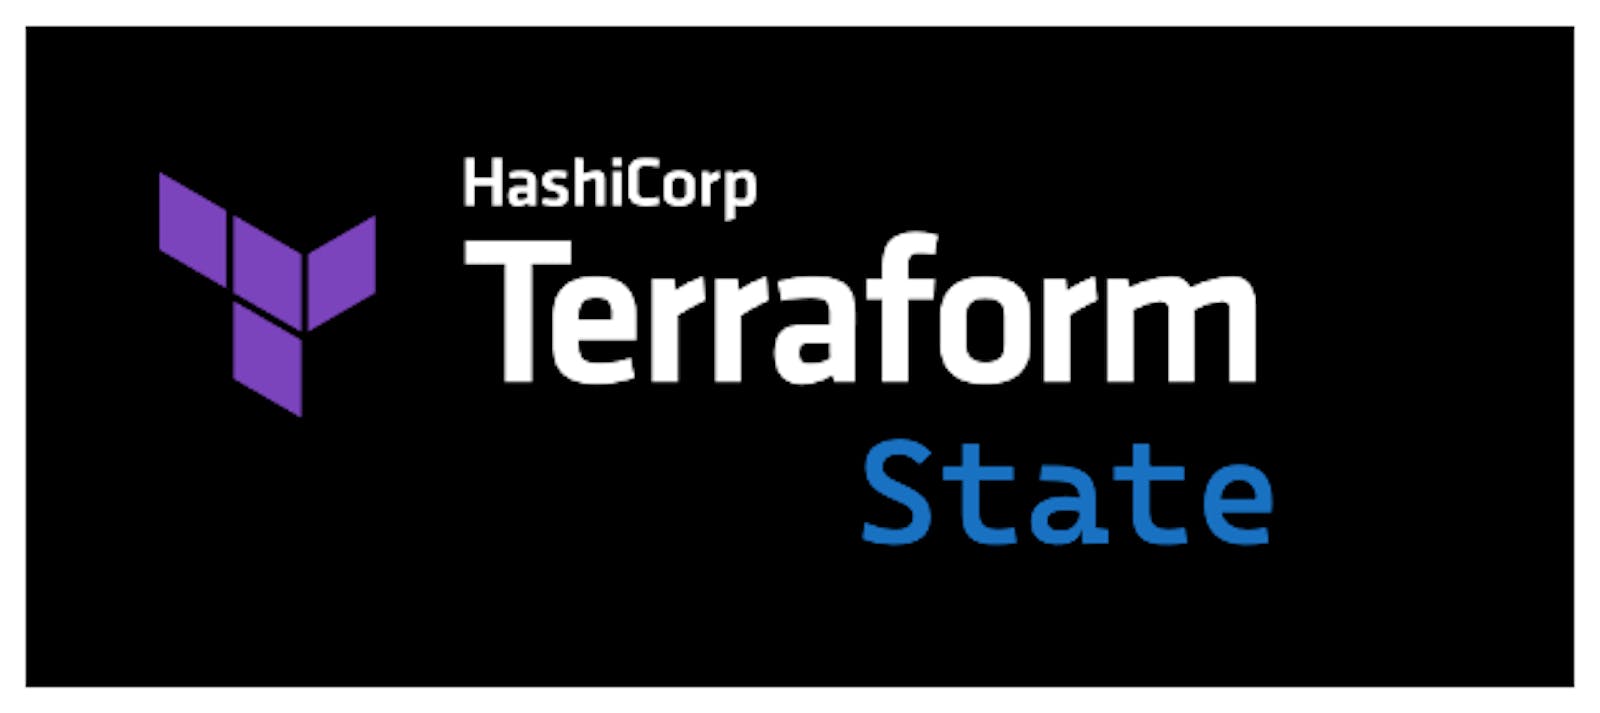 The 'State' of the Terraform!!